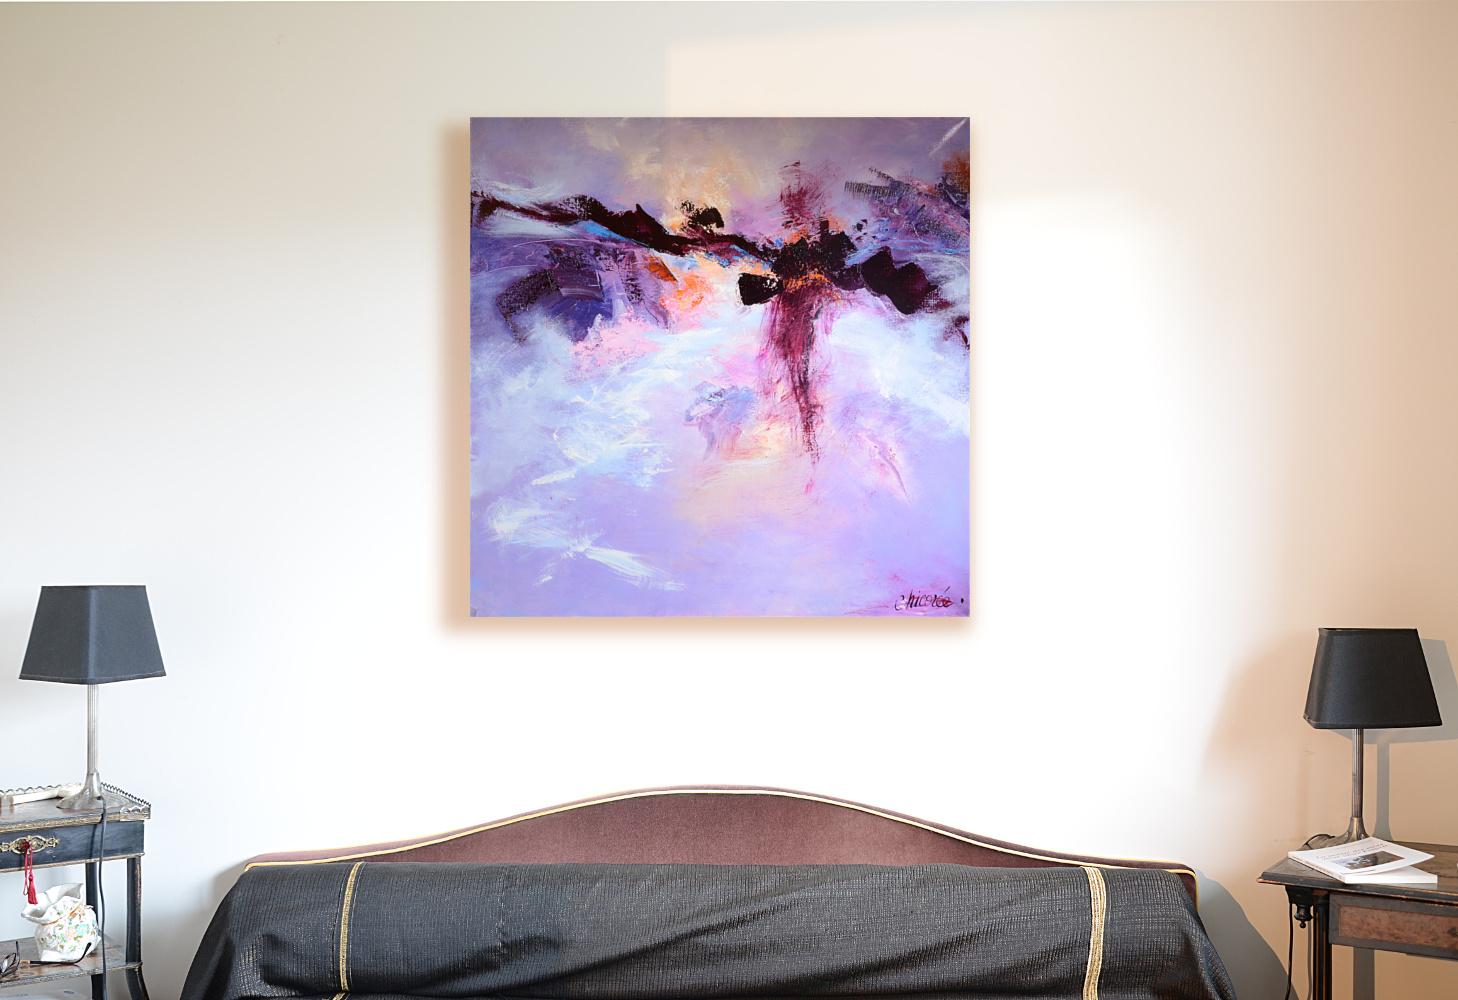  This piece is not framed.

Chicorée is a French artist, mostly influenced by William Turner, Zao Wou-Ki, Georges Mathieu, and colors of Vincent Van Gogh.  She paints mostly with bare hands and fingers, and sometimes with knife, and never with a